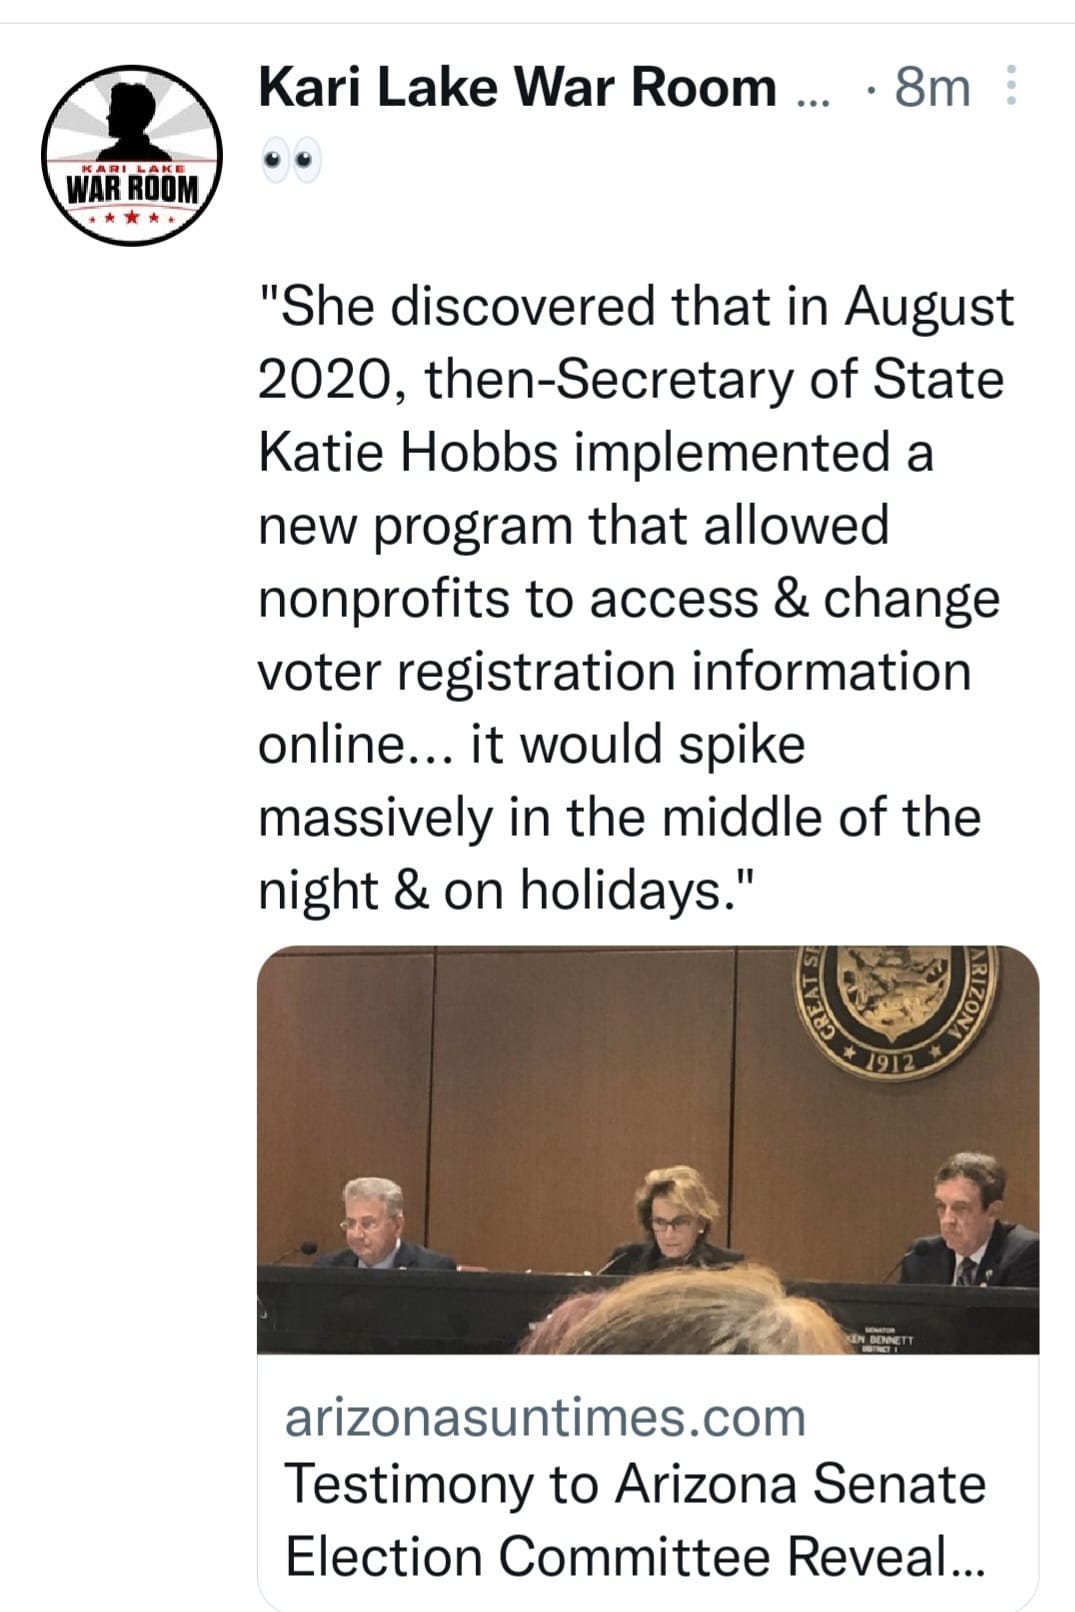 May be an image of 4 people and text that says 'Kari Lake War Room 8m "She discovered that in August 2020, then-Secretary of State Katie Hobbs implemented a new program that allowed nonprofits to access & change voter registration information online... it would spike massively in the middle of the night & on holidays." arizonasuntimes.com Testimony to Arizona Senate Election Committee Reveal...'